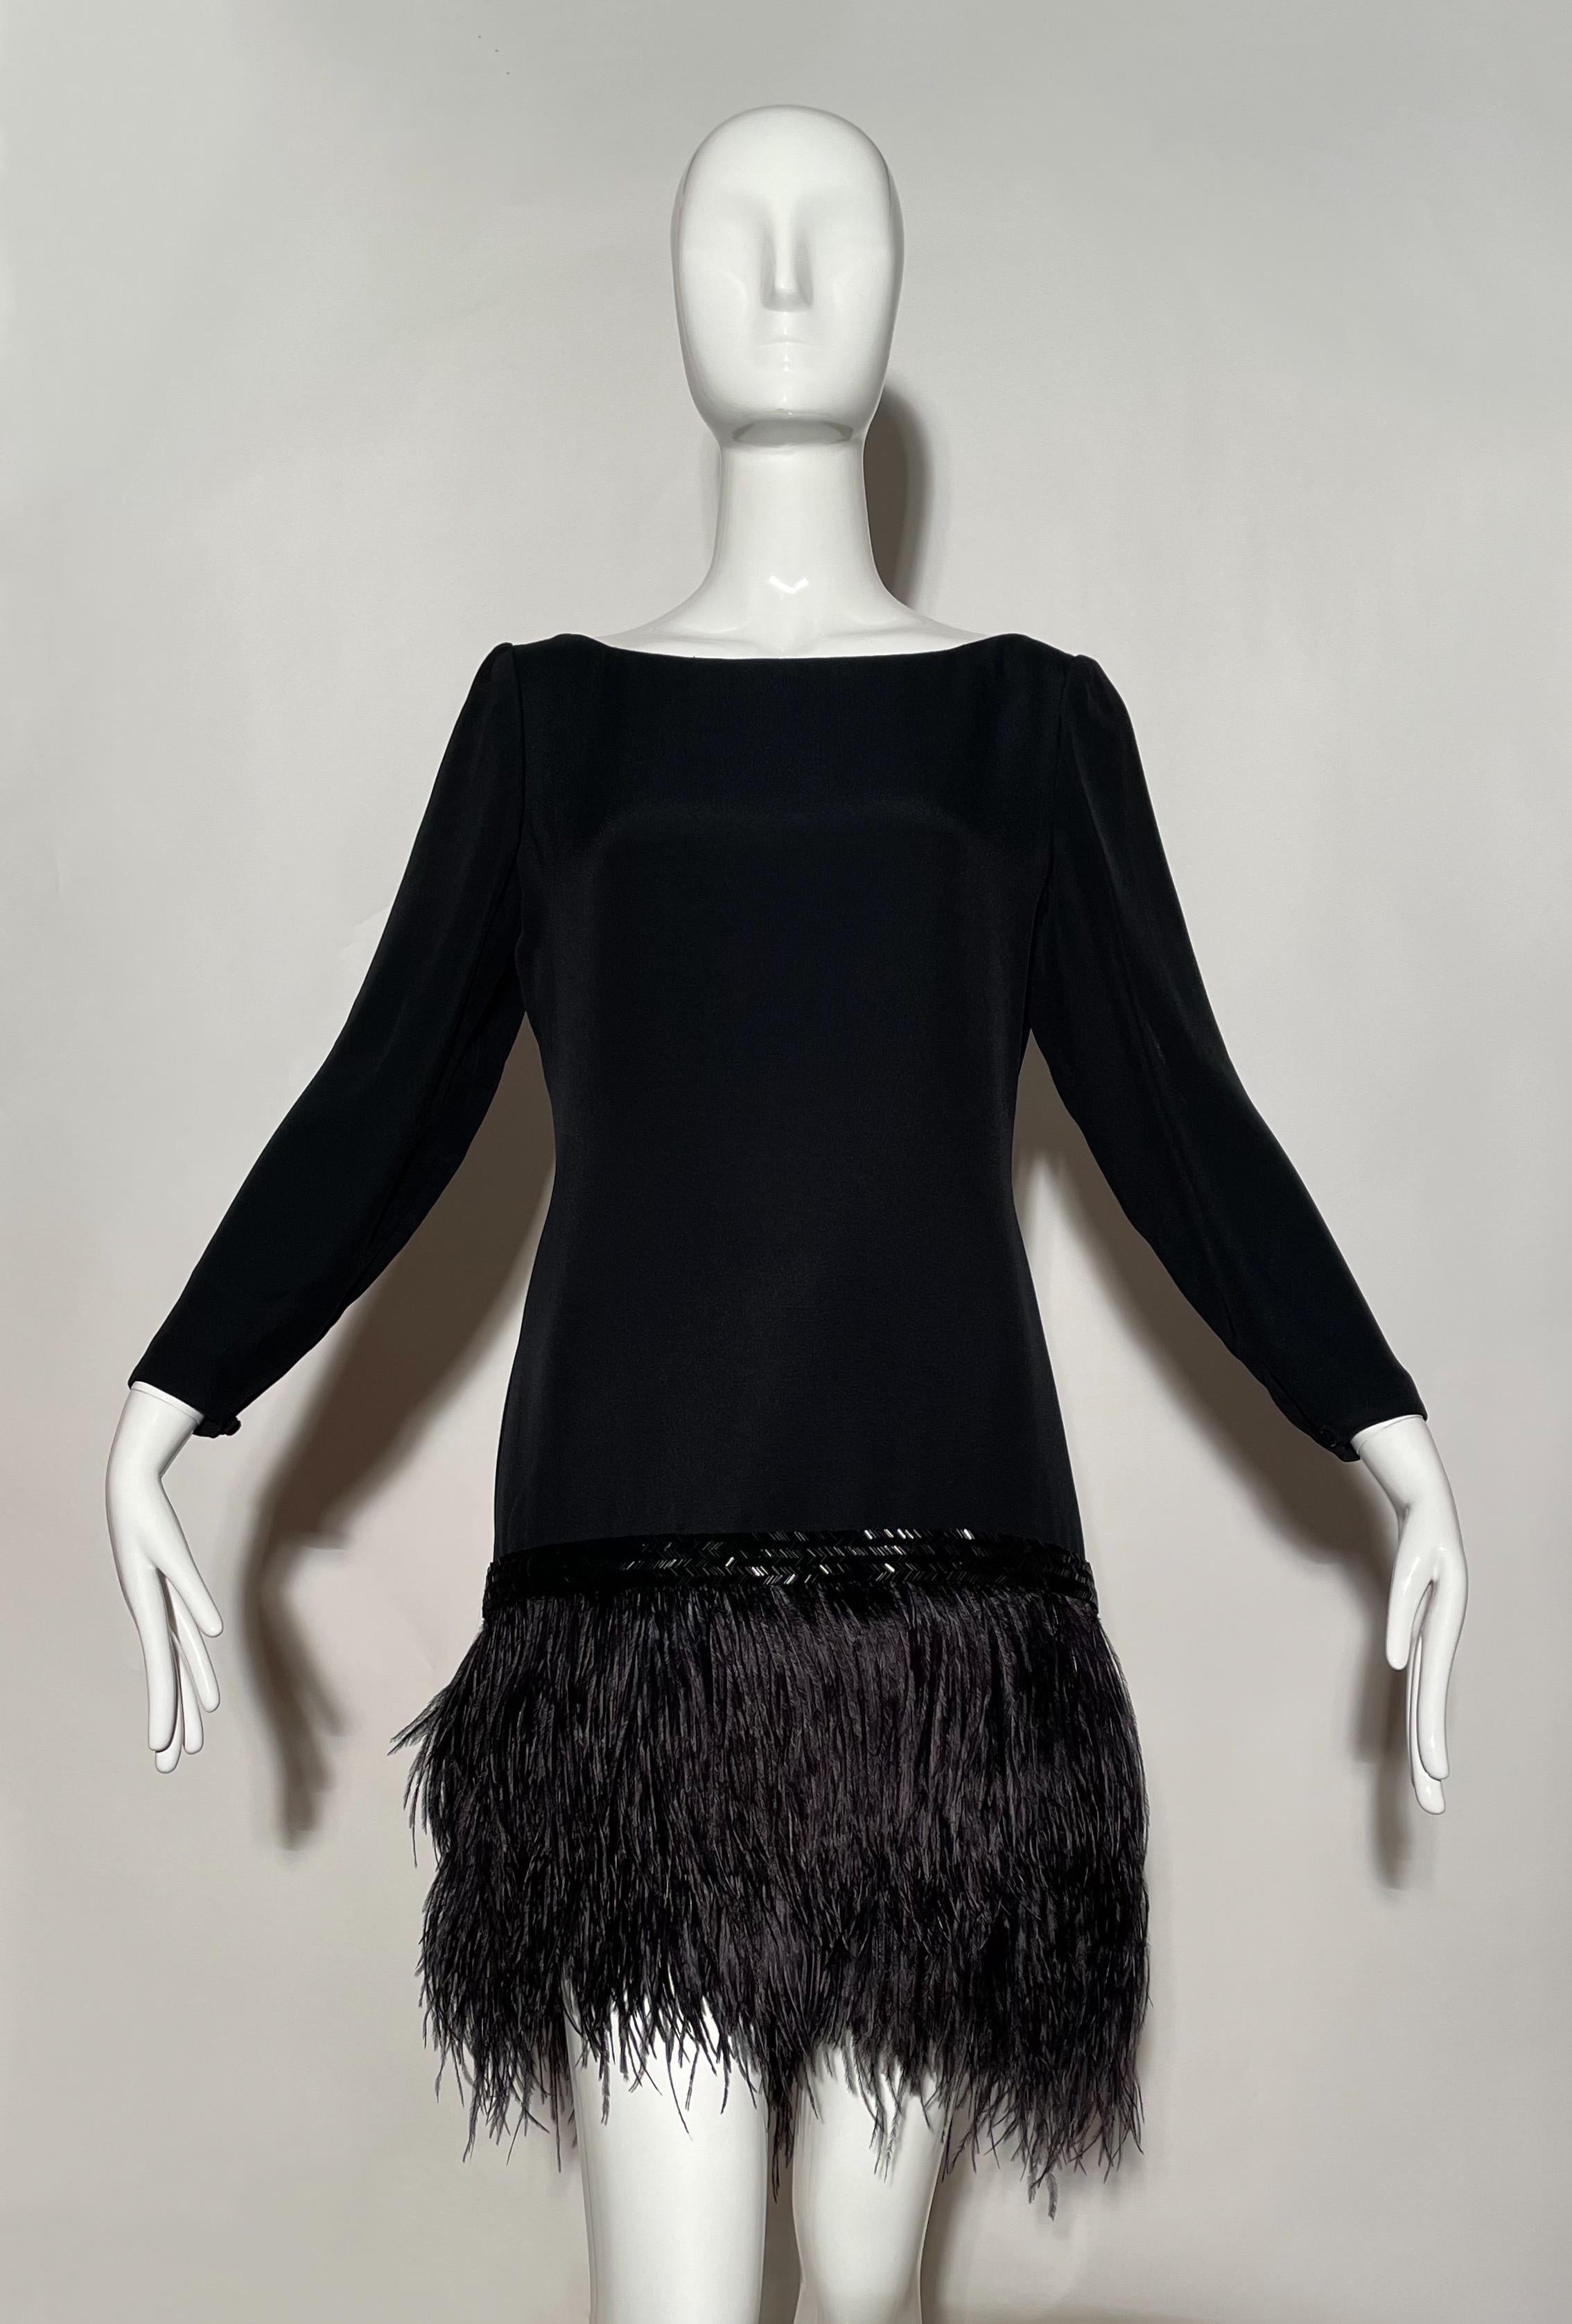 Black cocktail dress. Ostrich feather skirt. Beaded trim. Wide neckline. Zipper on back. Rayon and acetate. Lined. Made in USA.
*Condition: excellent vintage condition. No visible flaws.

Measurements Taken Laying Flat (inches)—
Shoulder to